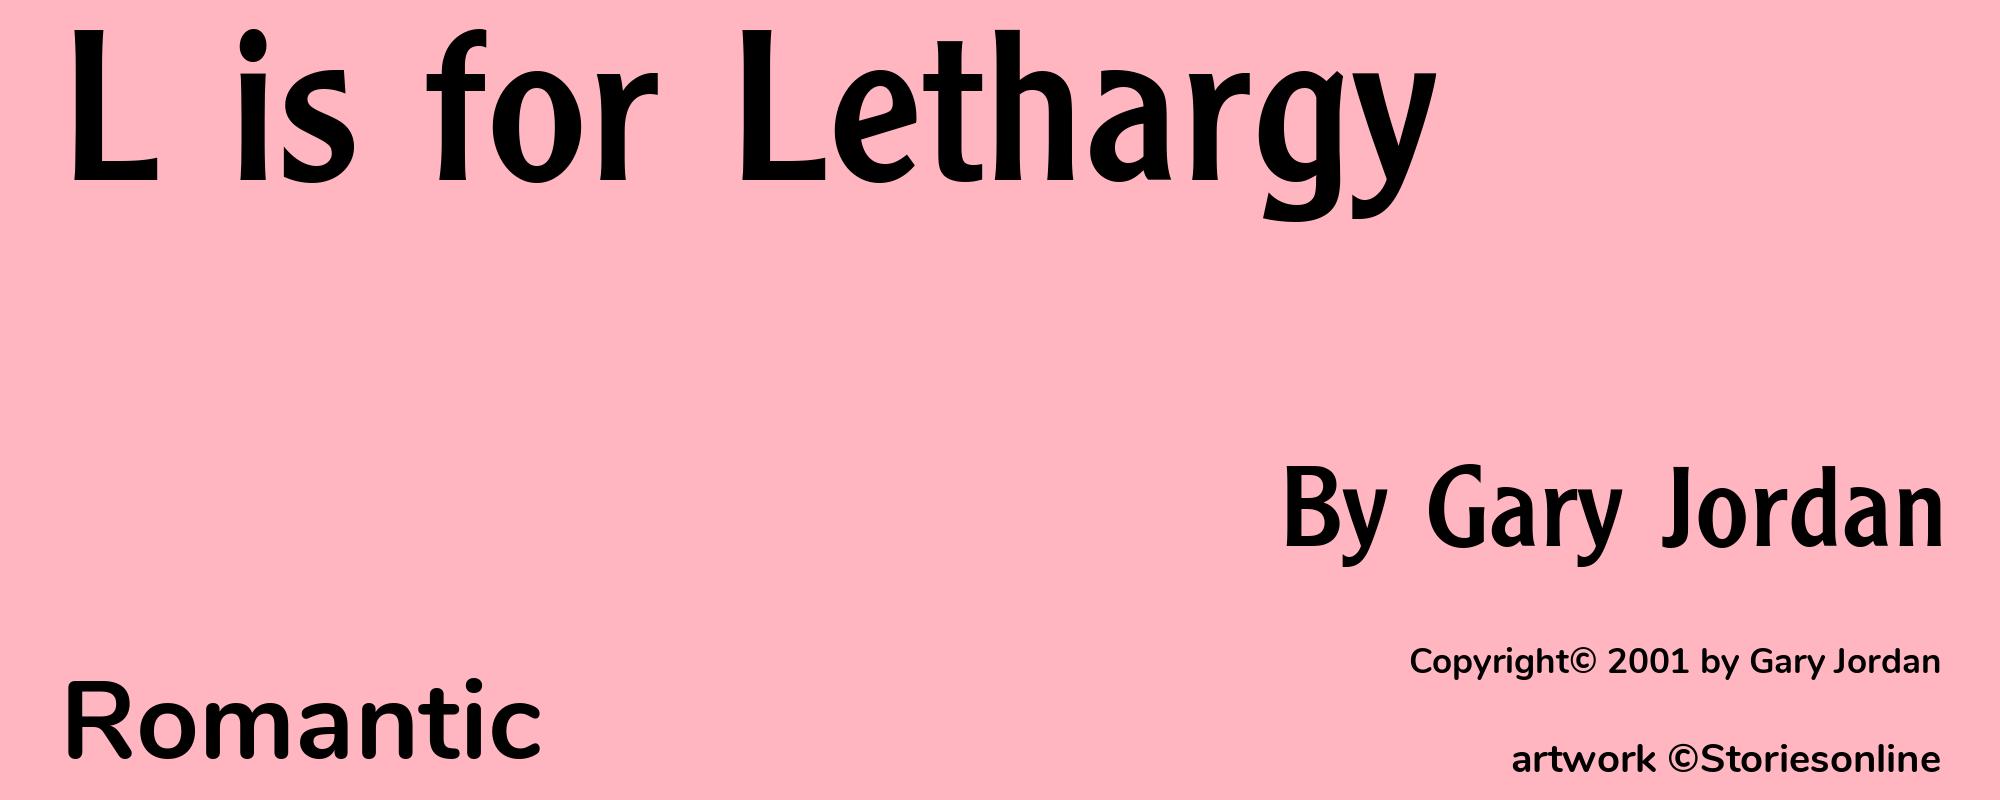 L is for Lethargy - Cover